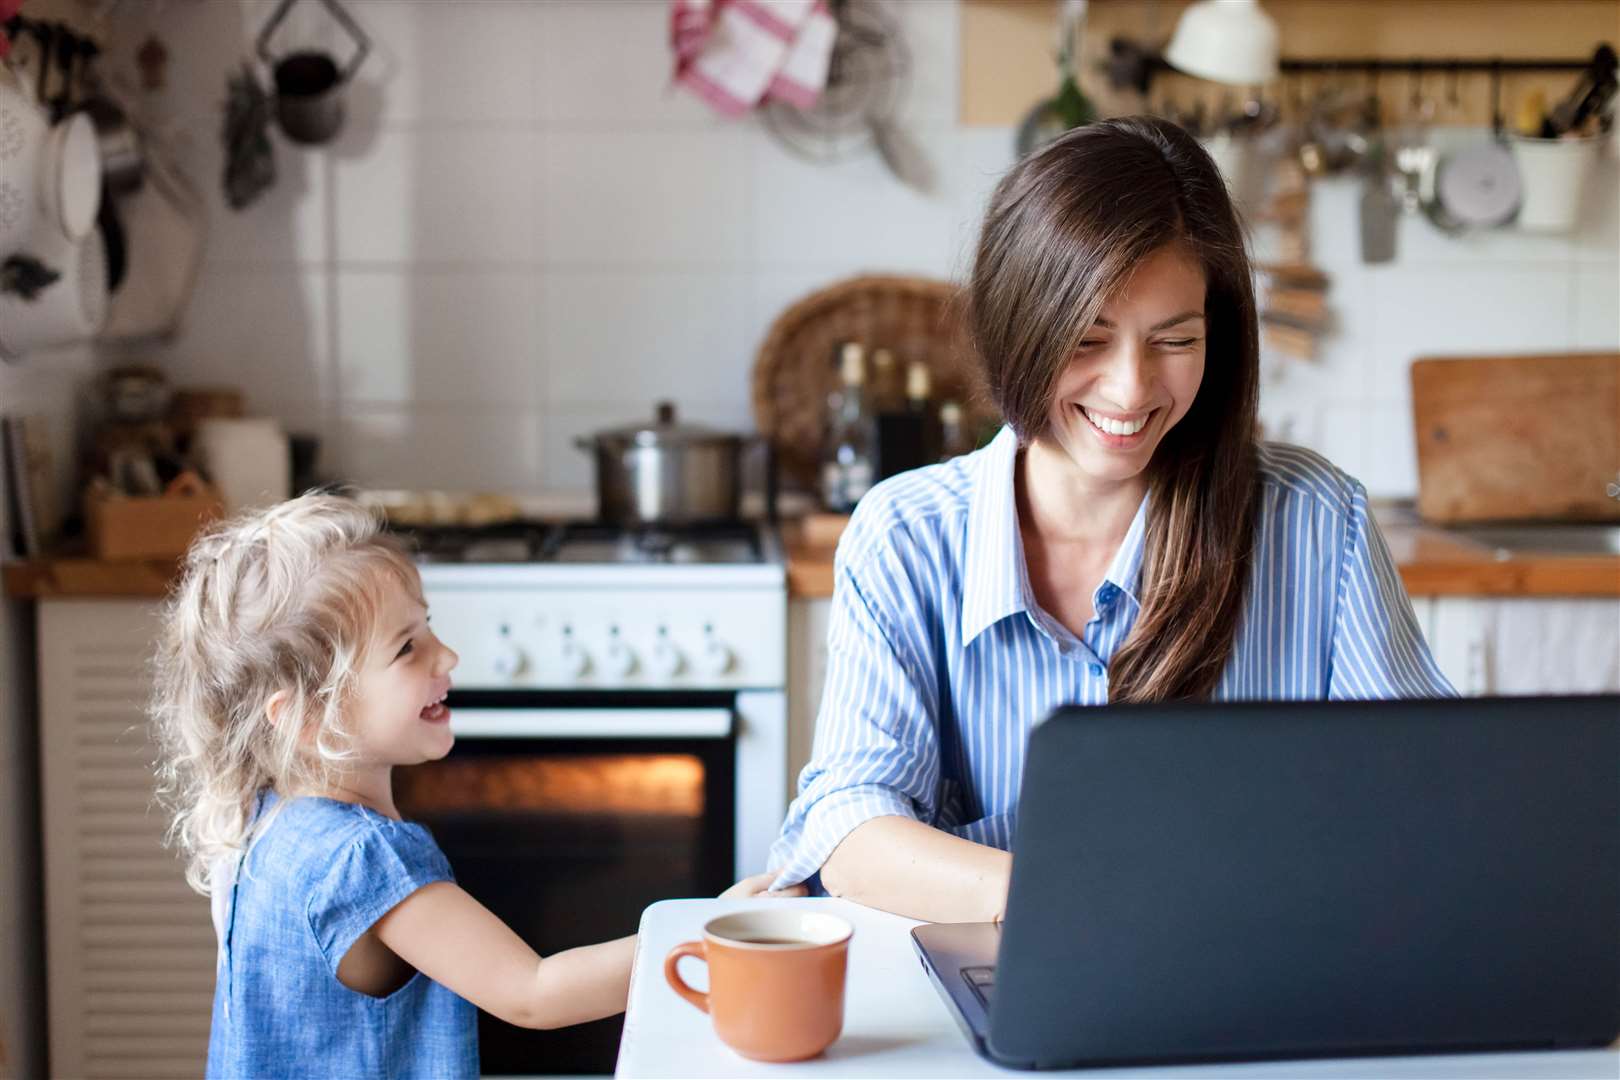 10 tips on how to survive when working from home with the kids.